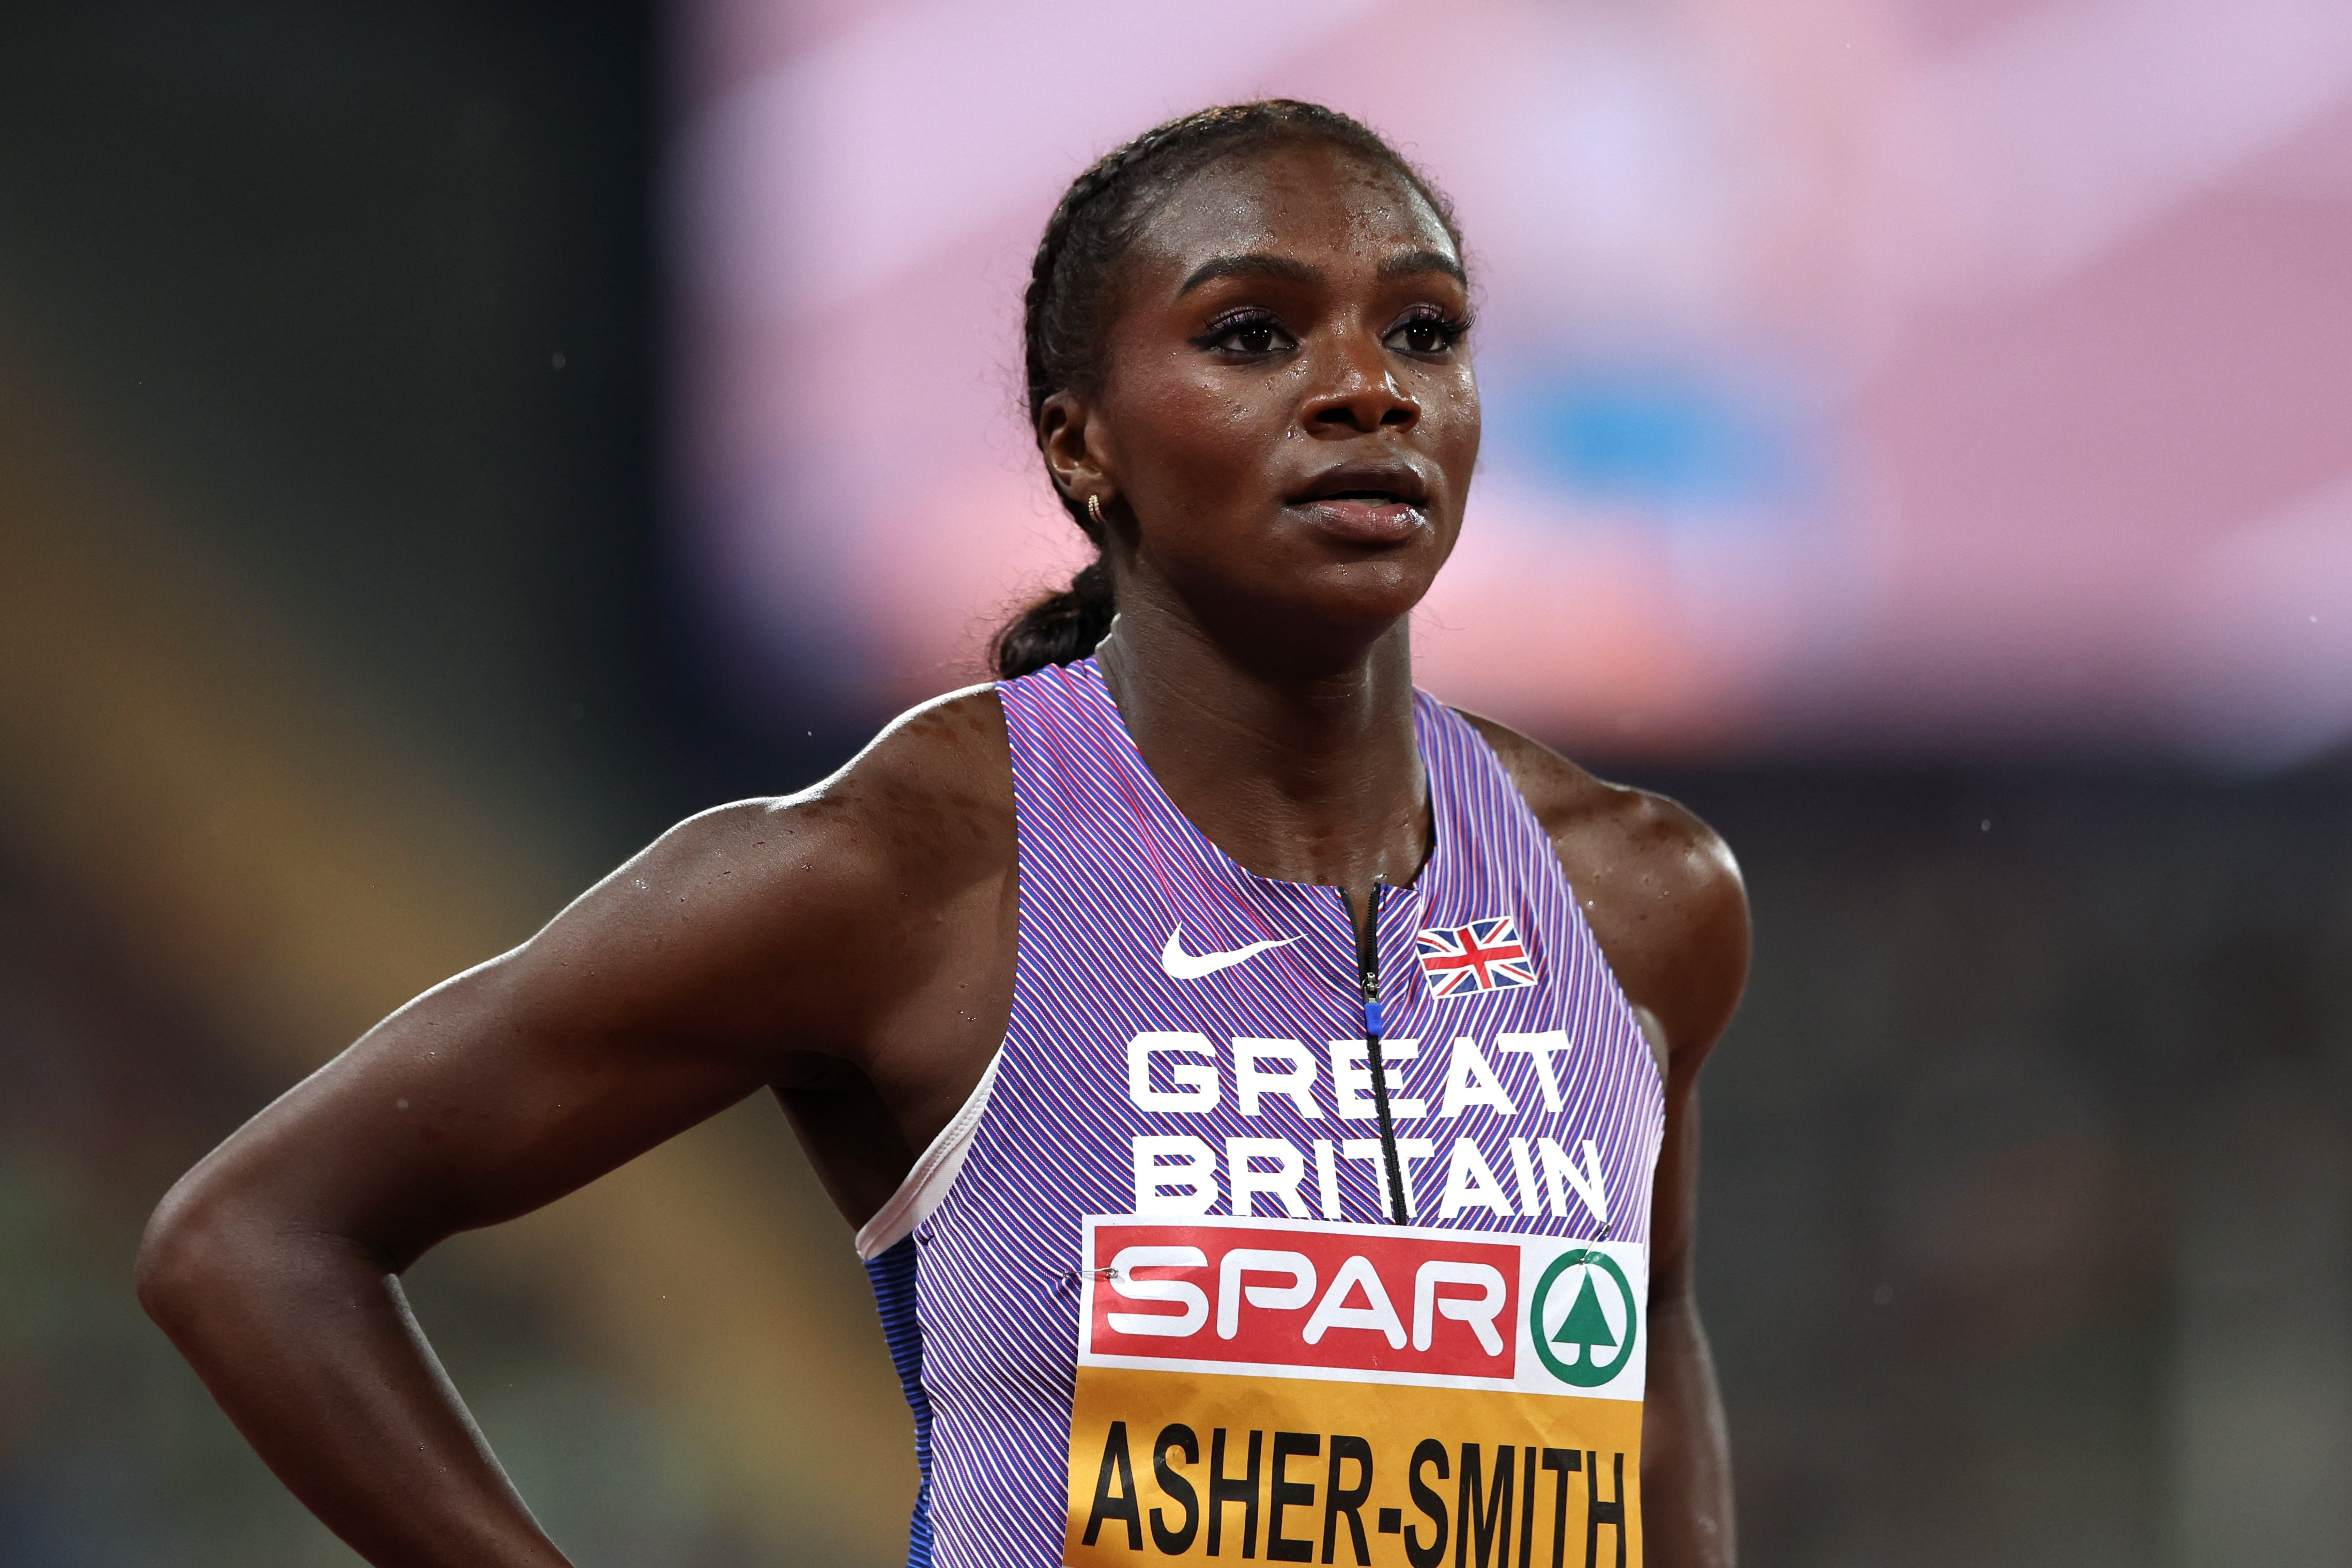 Asher-Smith revealed she had been affected by her menstrual cycle